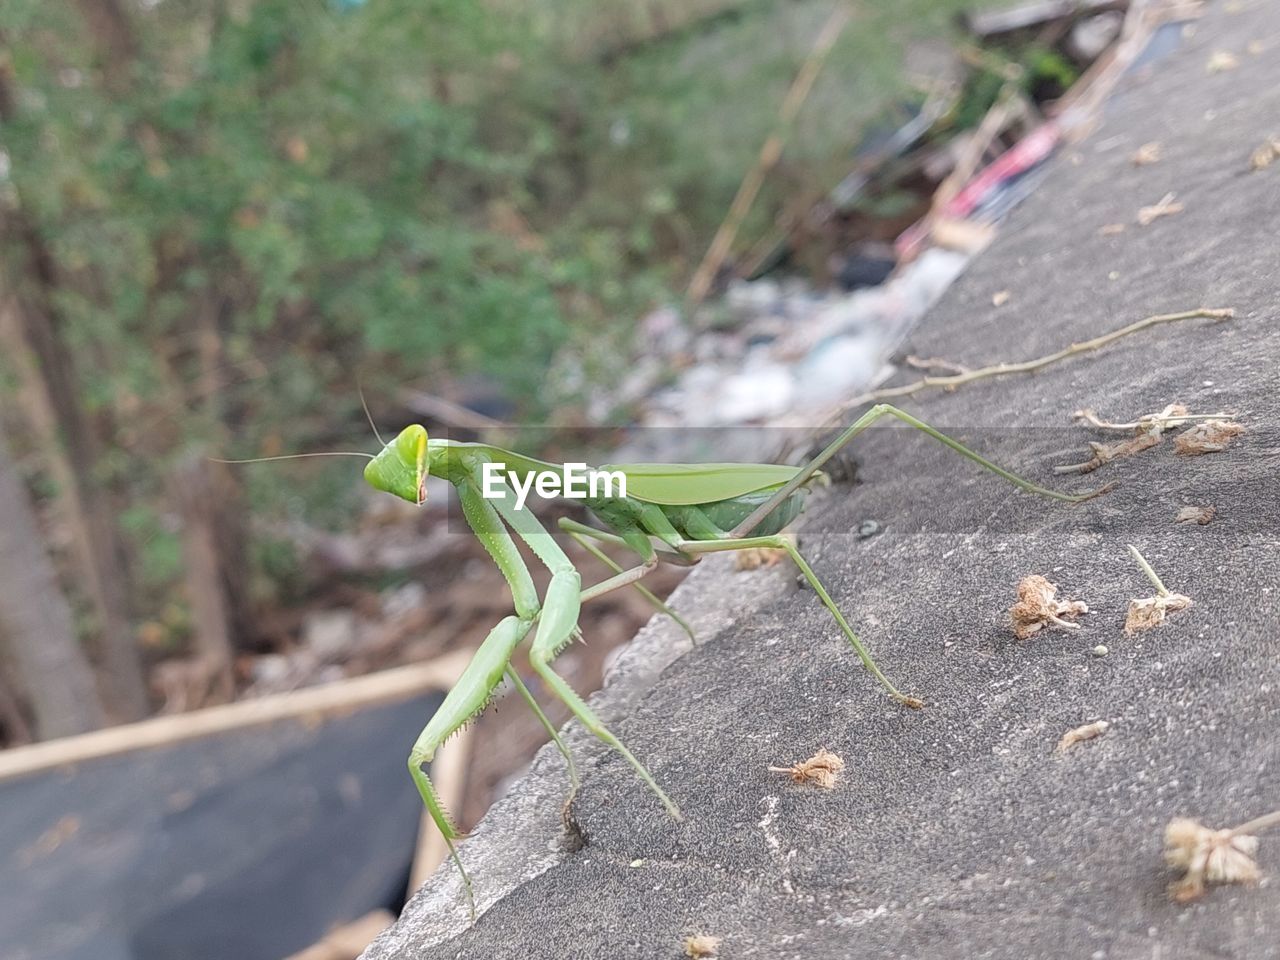 animal themes, animal, animal wildlife, green, one animal, wildlife, leaf, day, nature, mantis, insect, no people, close-up, praying mantis, focus on foreground, outdoors, plant, plant part, tree, road